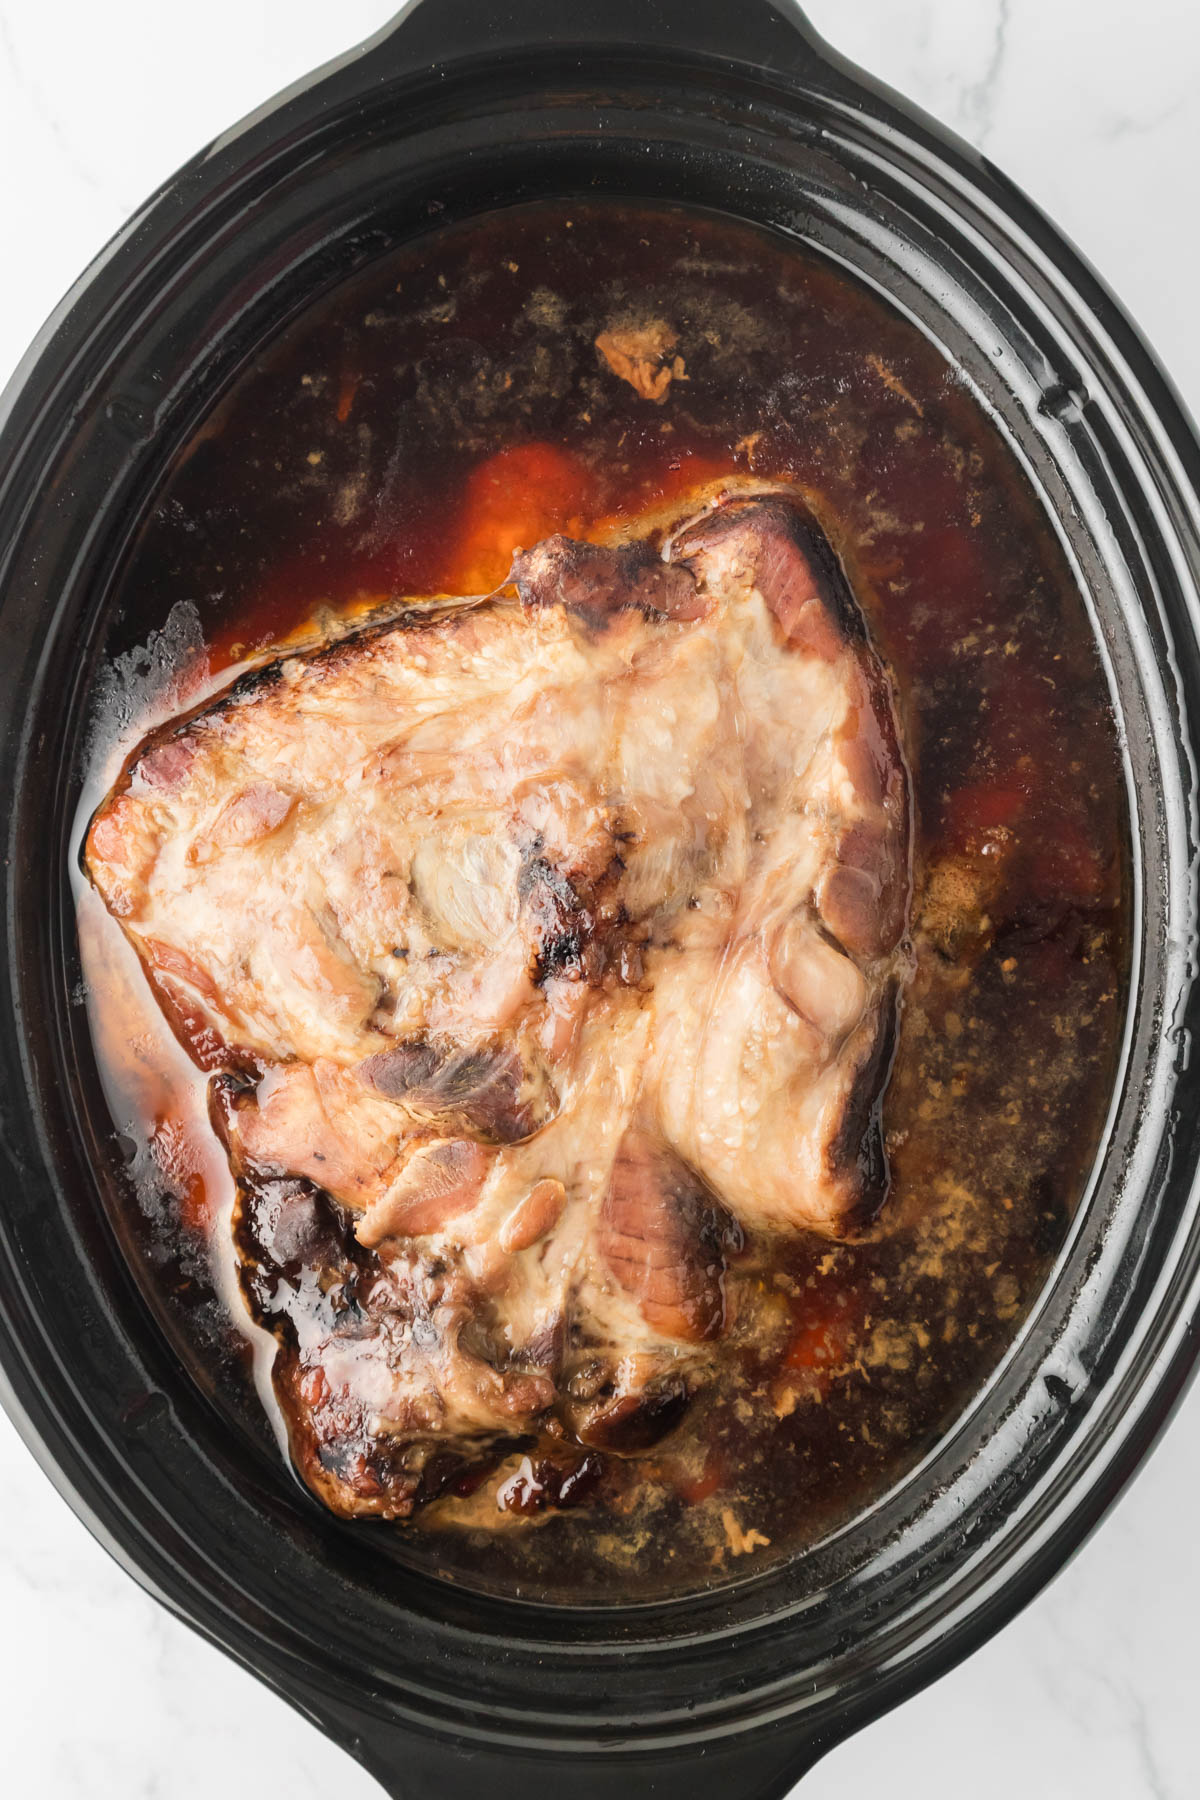 Image of pork shoulder after cooking in a slow cooker, with liquid visible around the pork. 